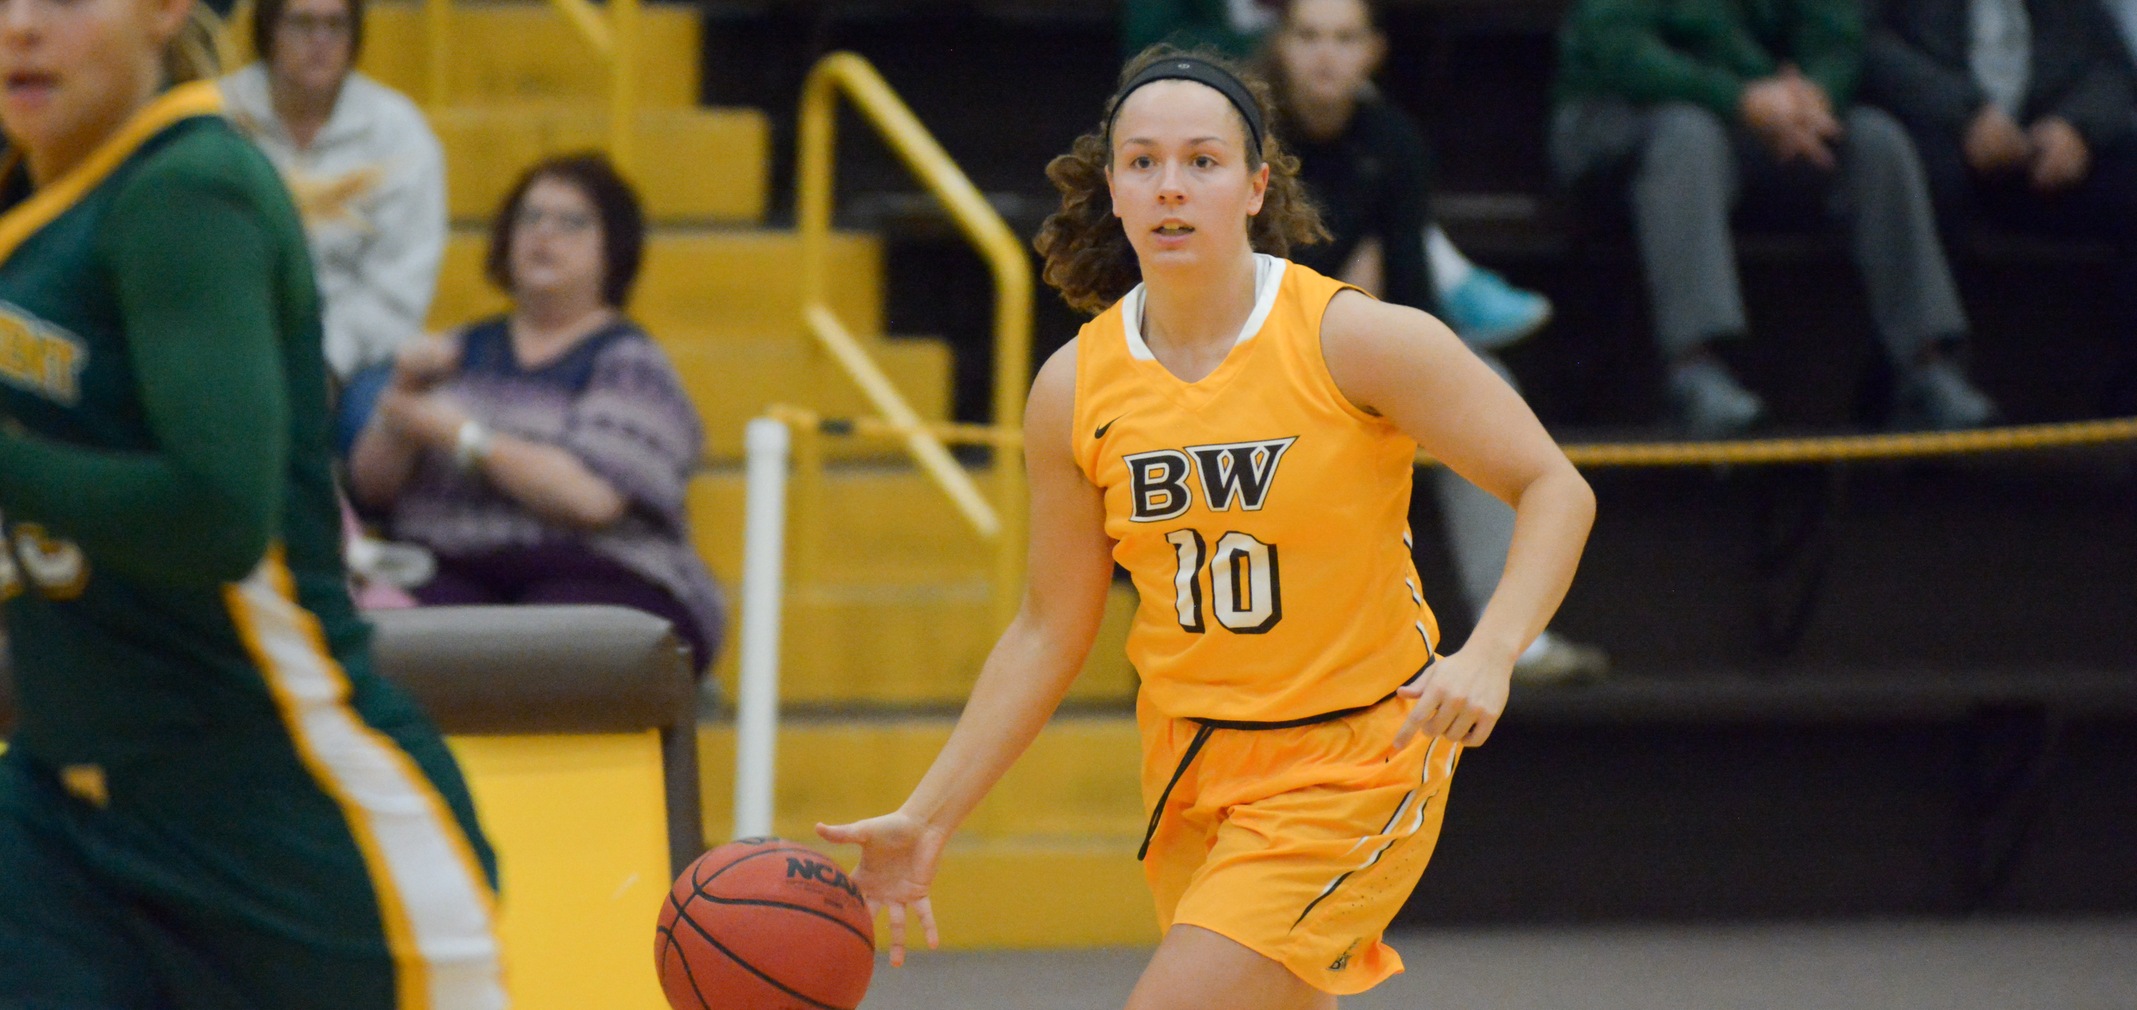 Senior Academic All-OAC guard Katie Smith (Photo by Steven Schuster)